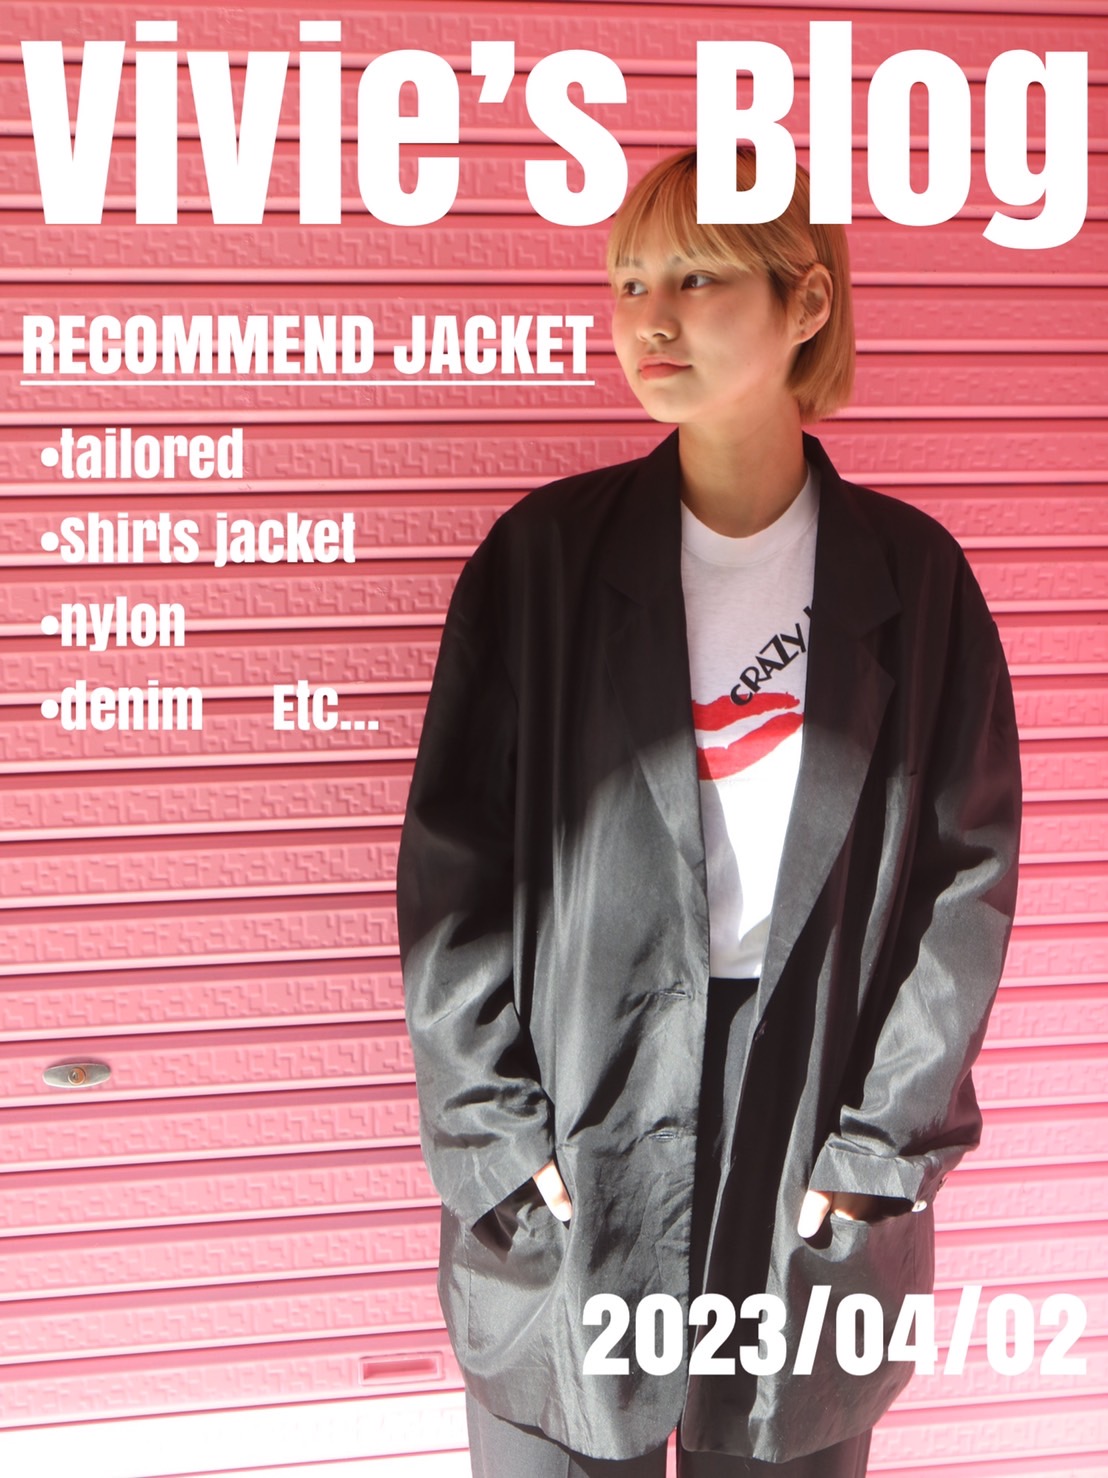 recommend jacket!!